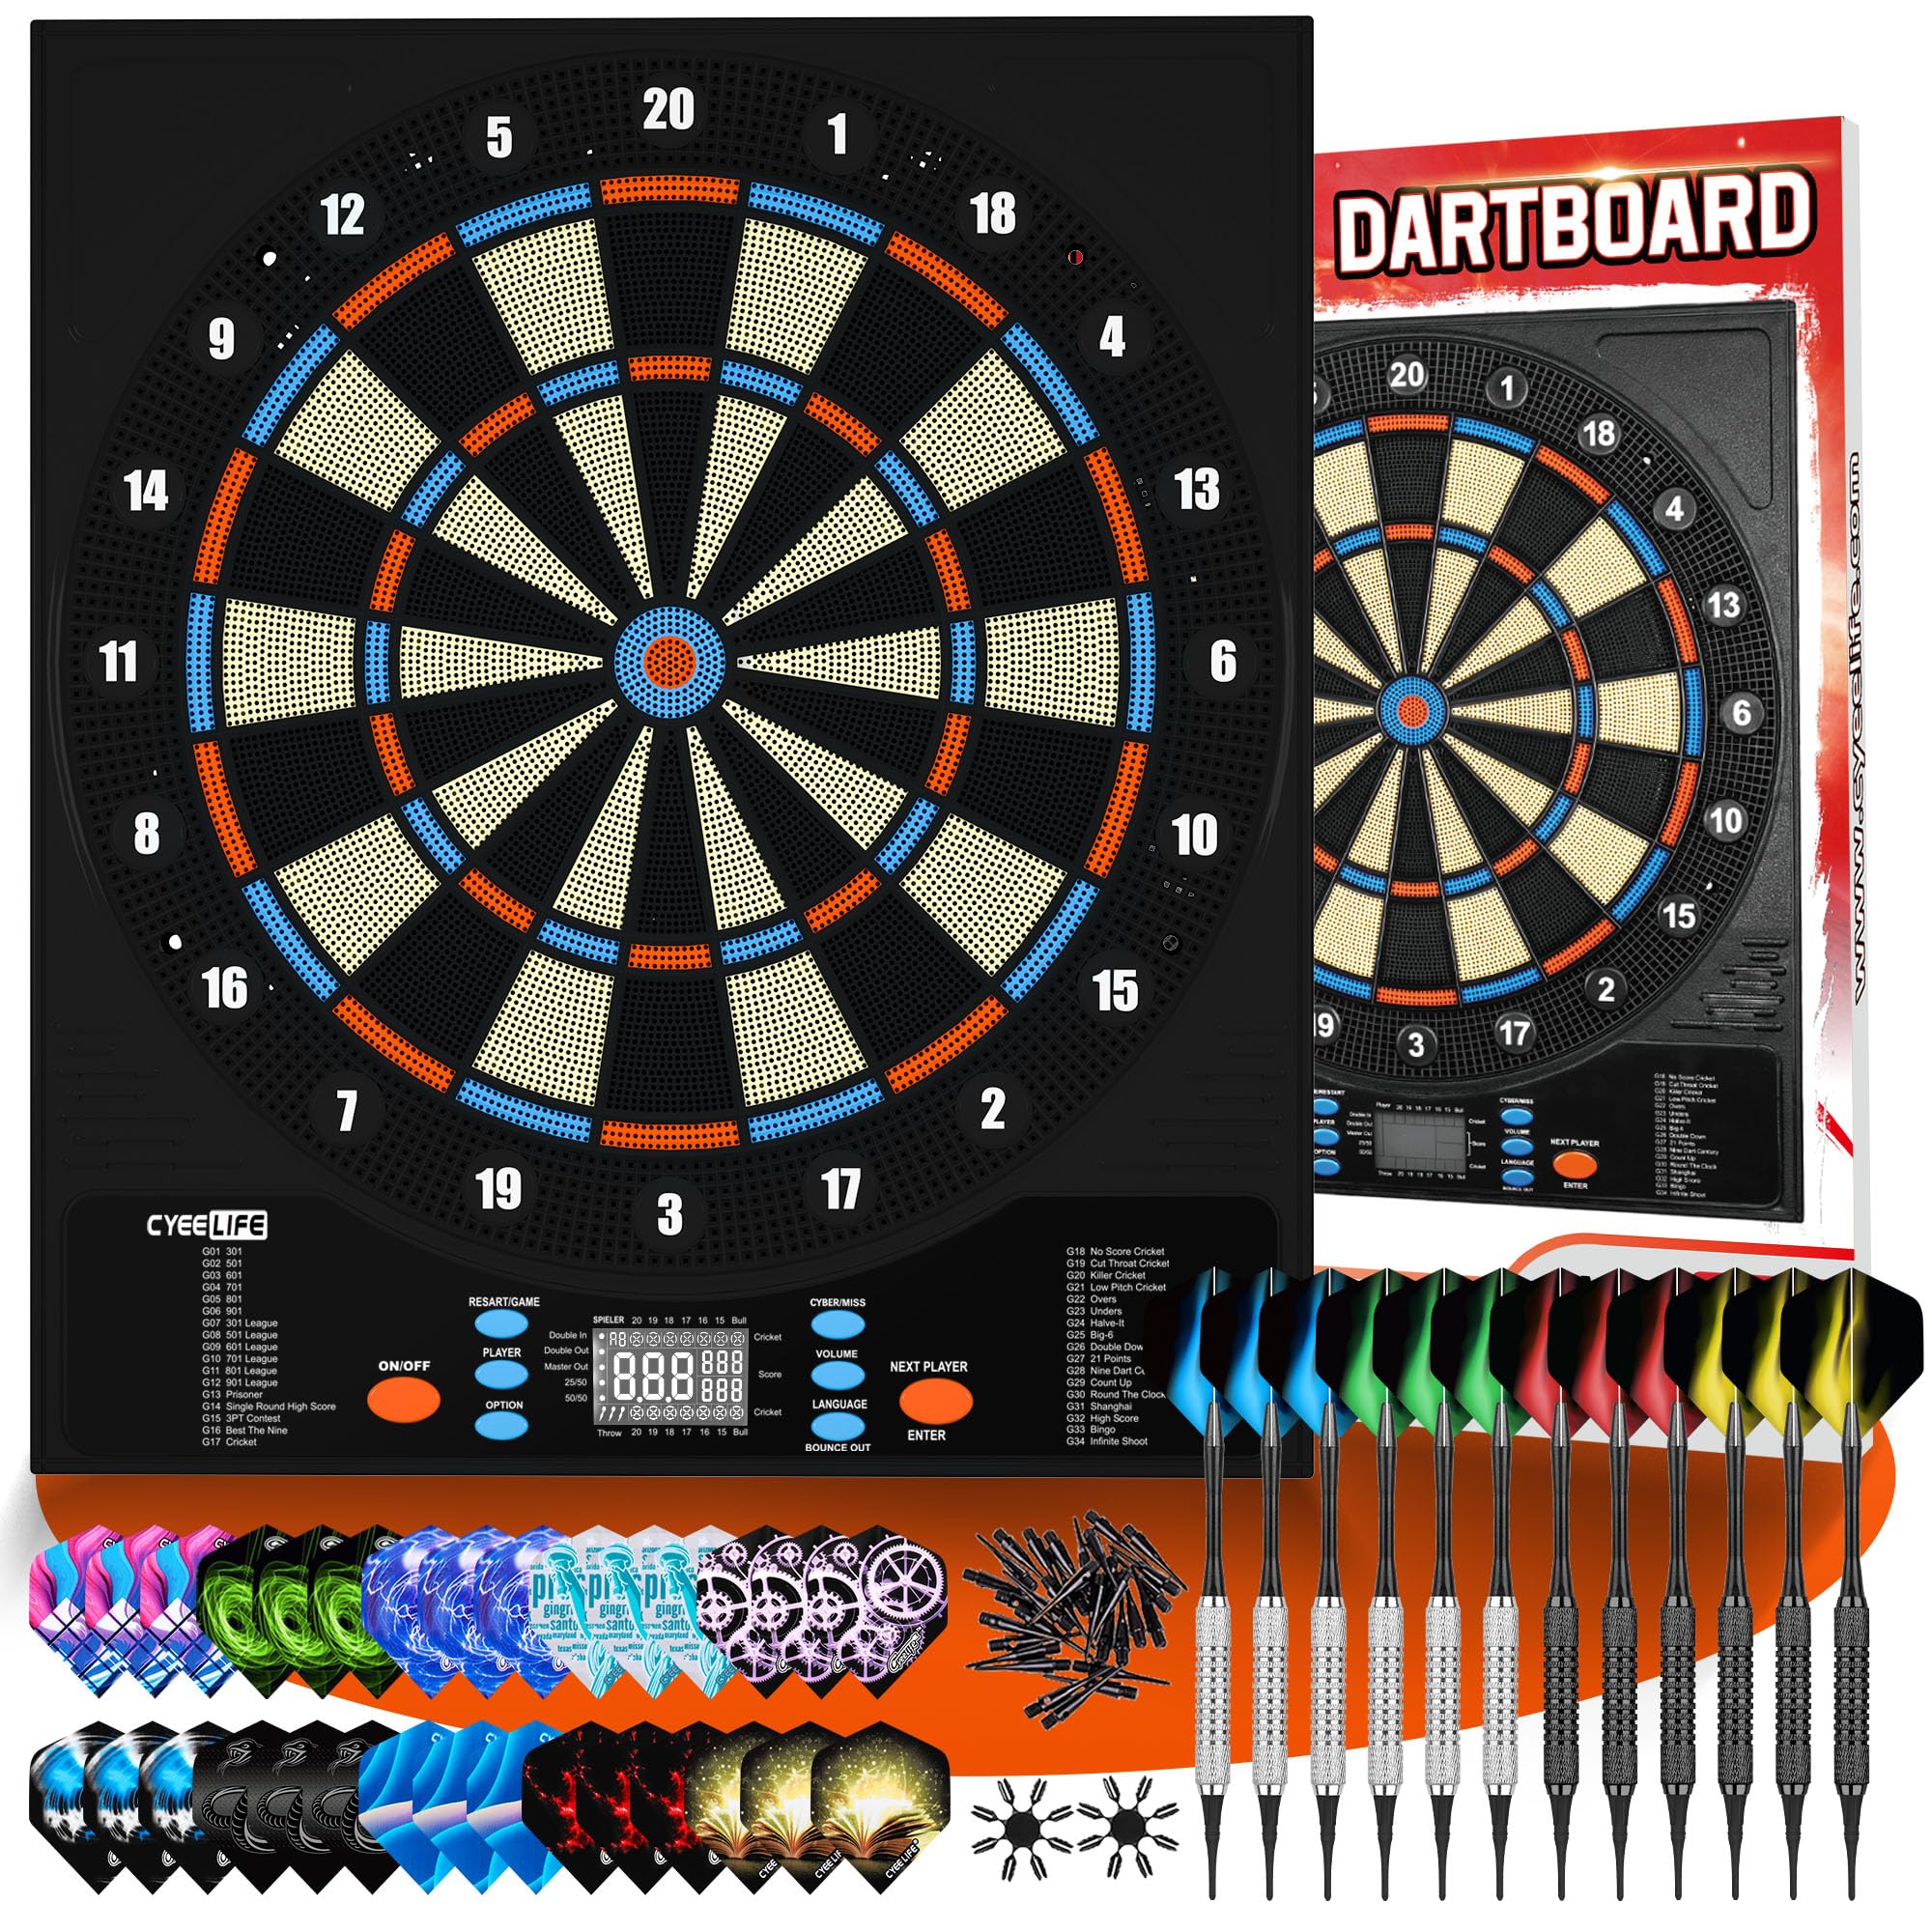 CyeeLife Electronic Dartboard&12 Soft Darts,8 Players&34 Games&255 Variations,Battery/Adapter/3 Languages Switching for Professi